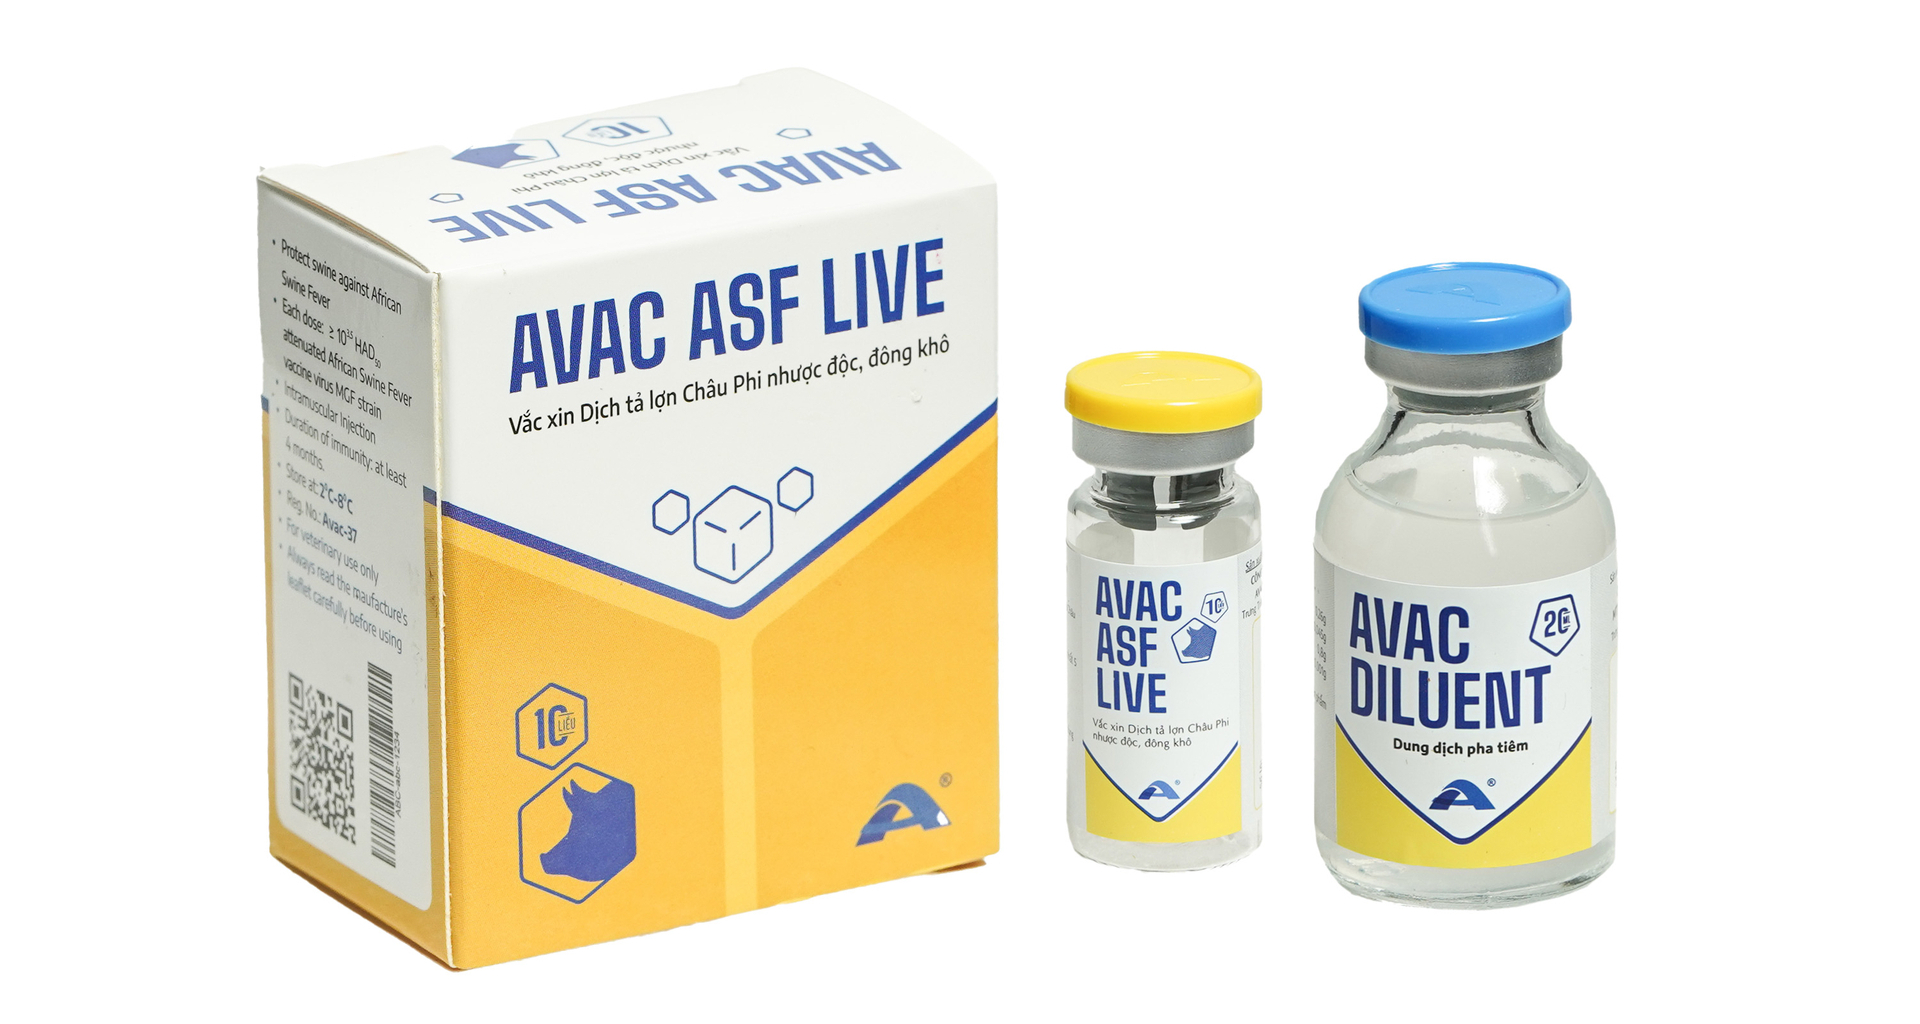 To date, over 1 million doses of the AVAC ASF LIVE vaccine have been used. Photo: AVAC.